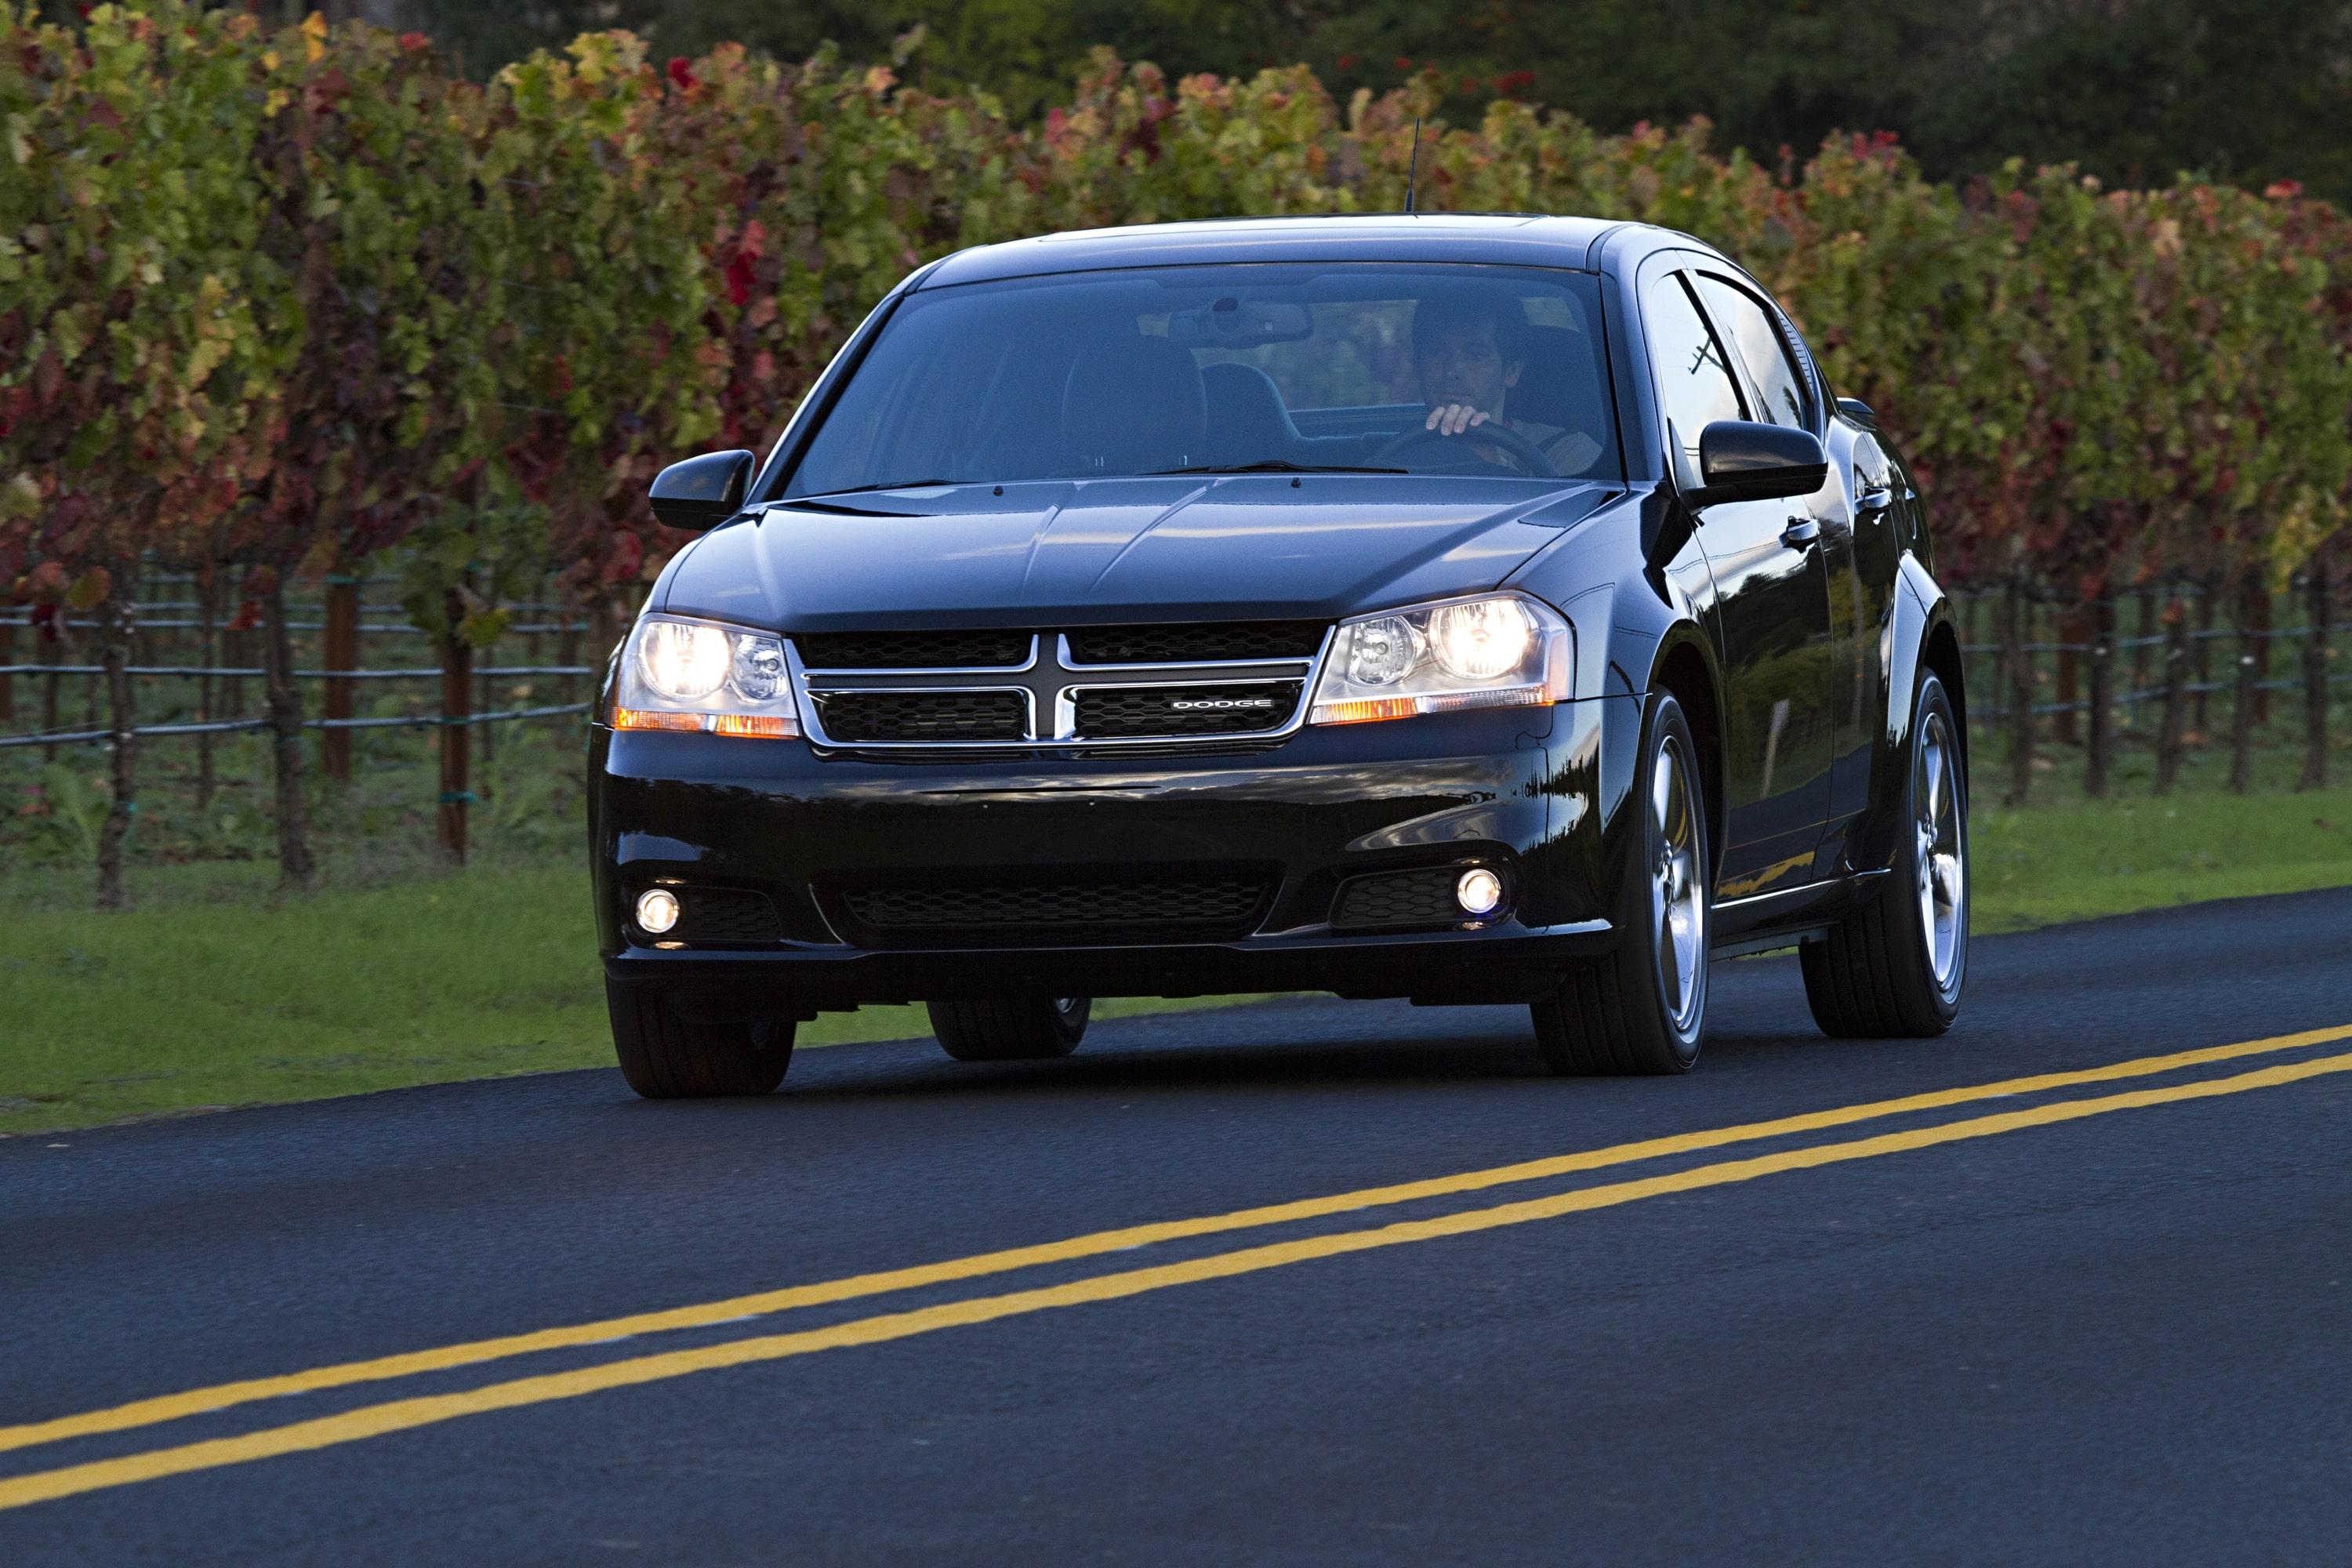 A Dodge Avenger body kit can help you change your car’s appearance and performance.